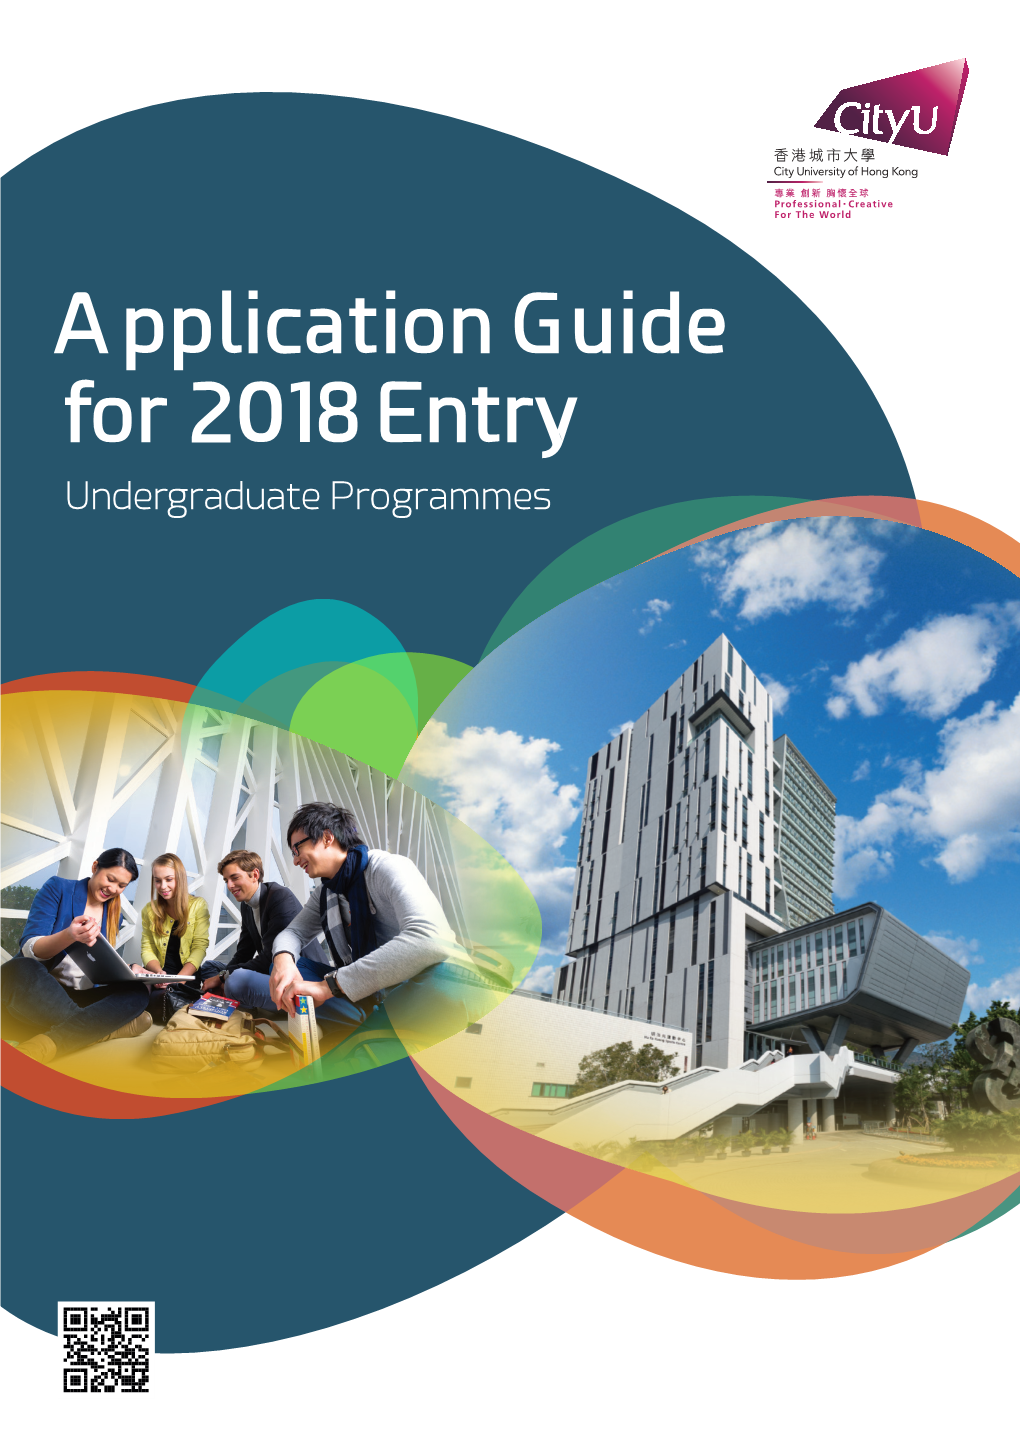 Application Guide for 2018 Entry Undergraduate Programmes